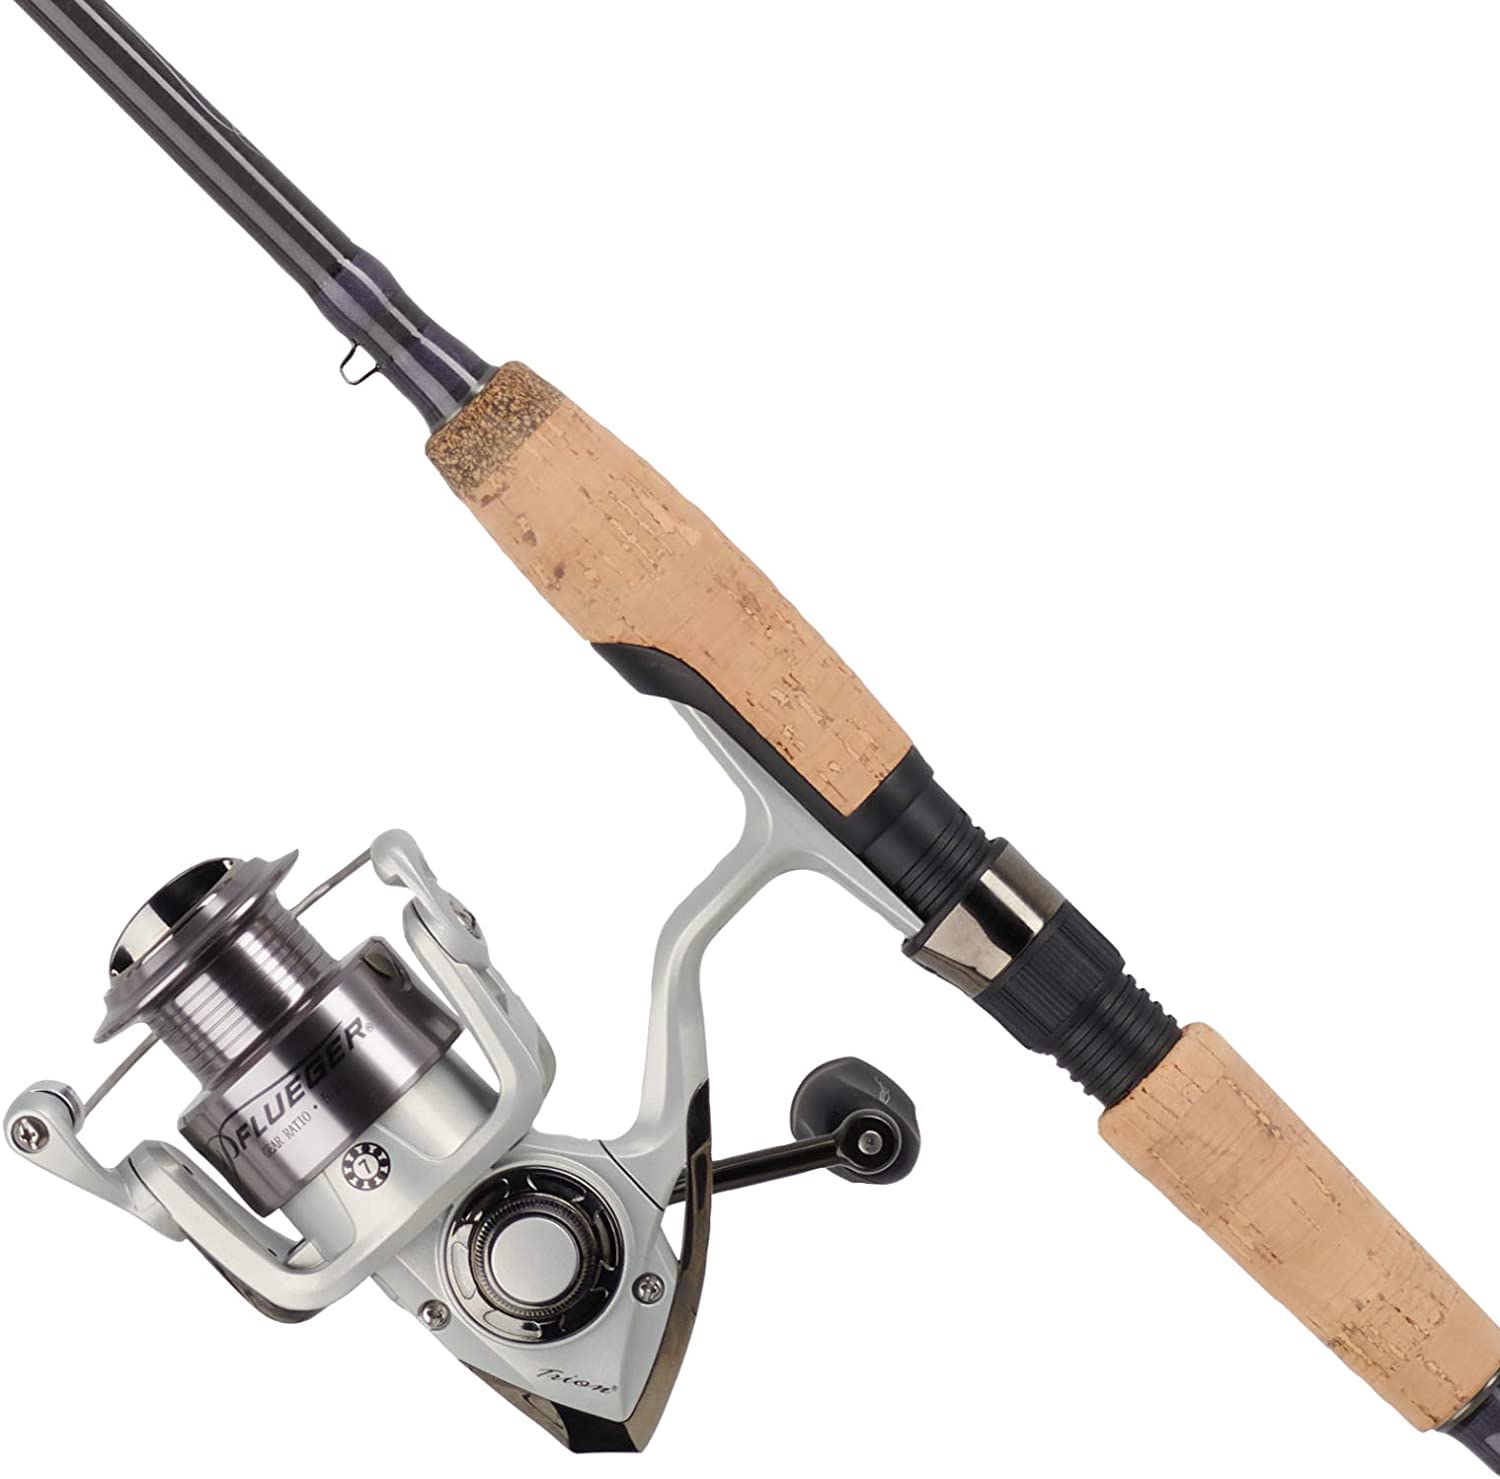 Pflueger Trion Spinning Combo New Model 30 Size Reel - 6'6" - M - 2pc with Fenwick Eagle Rod & Berkley Flicker Shad Baits - image 2 of 2